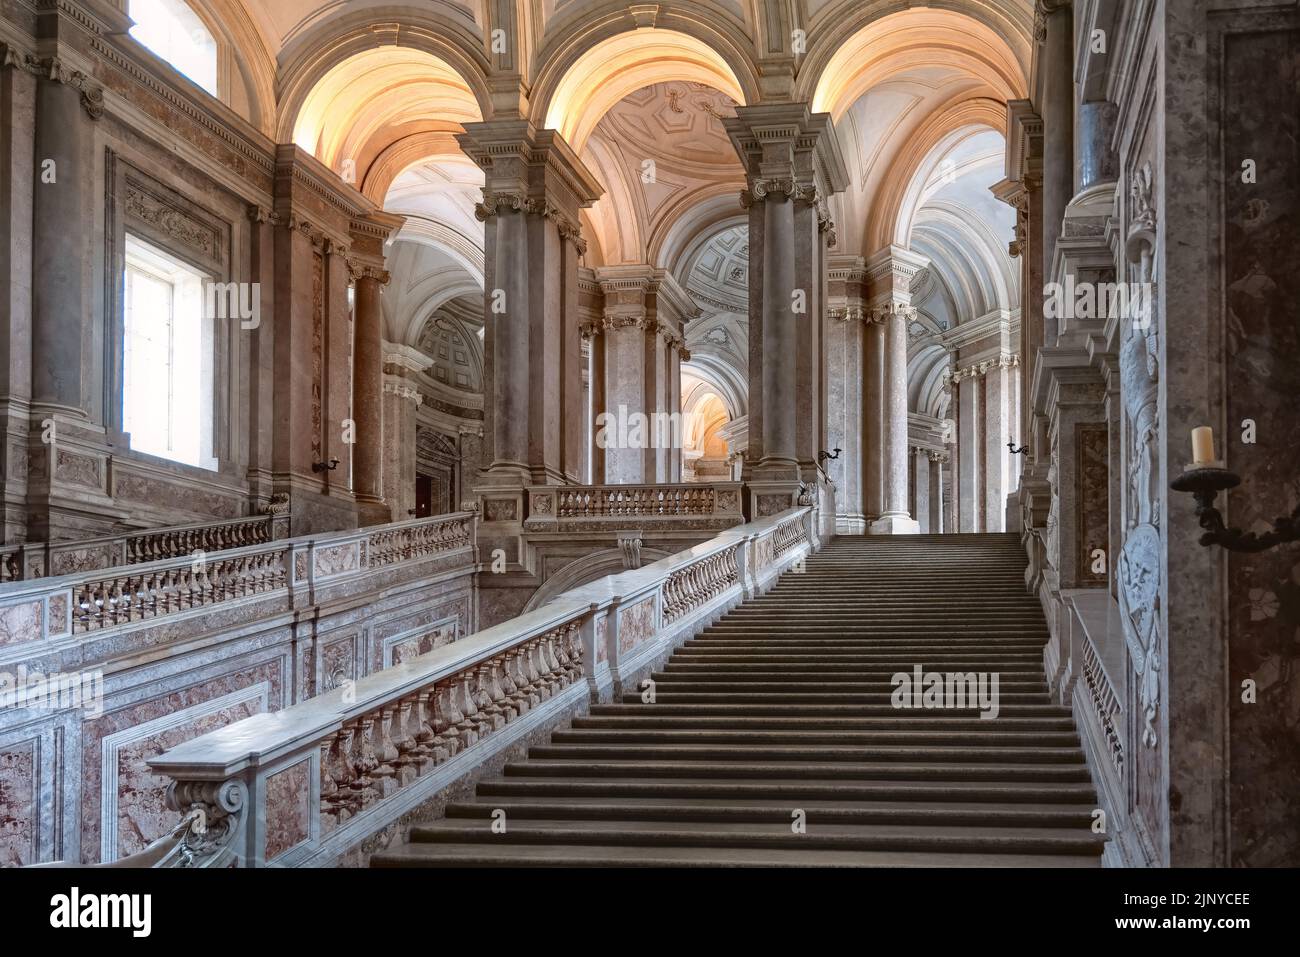 Caserta, Italy - September 16, 2009: The Grand Staircase of Honour of the Palace of Caserta. It was designated a UNESCO World Heritage site Stock Photo